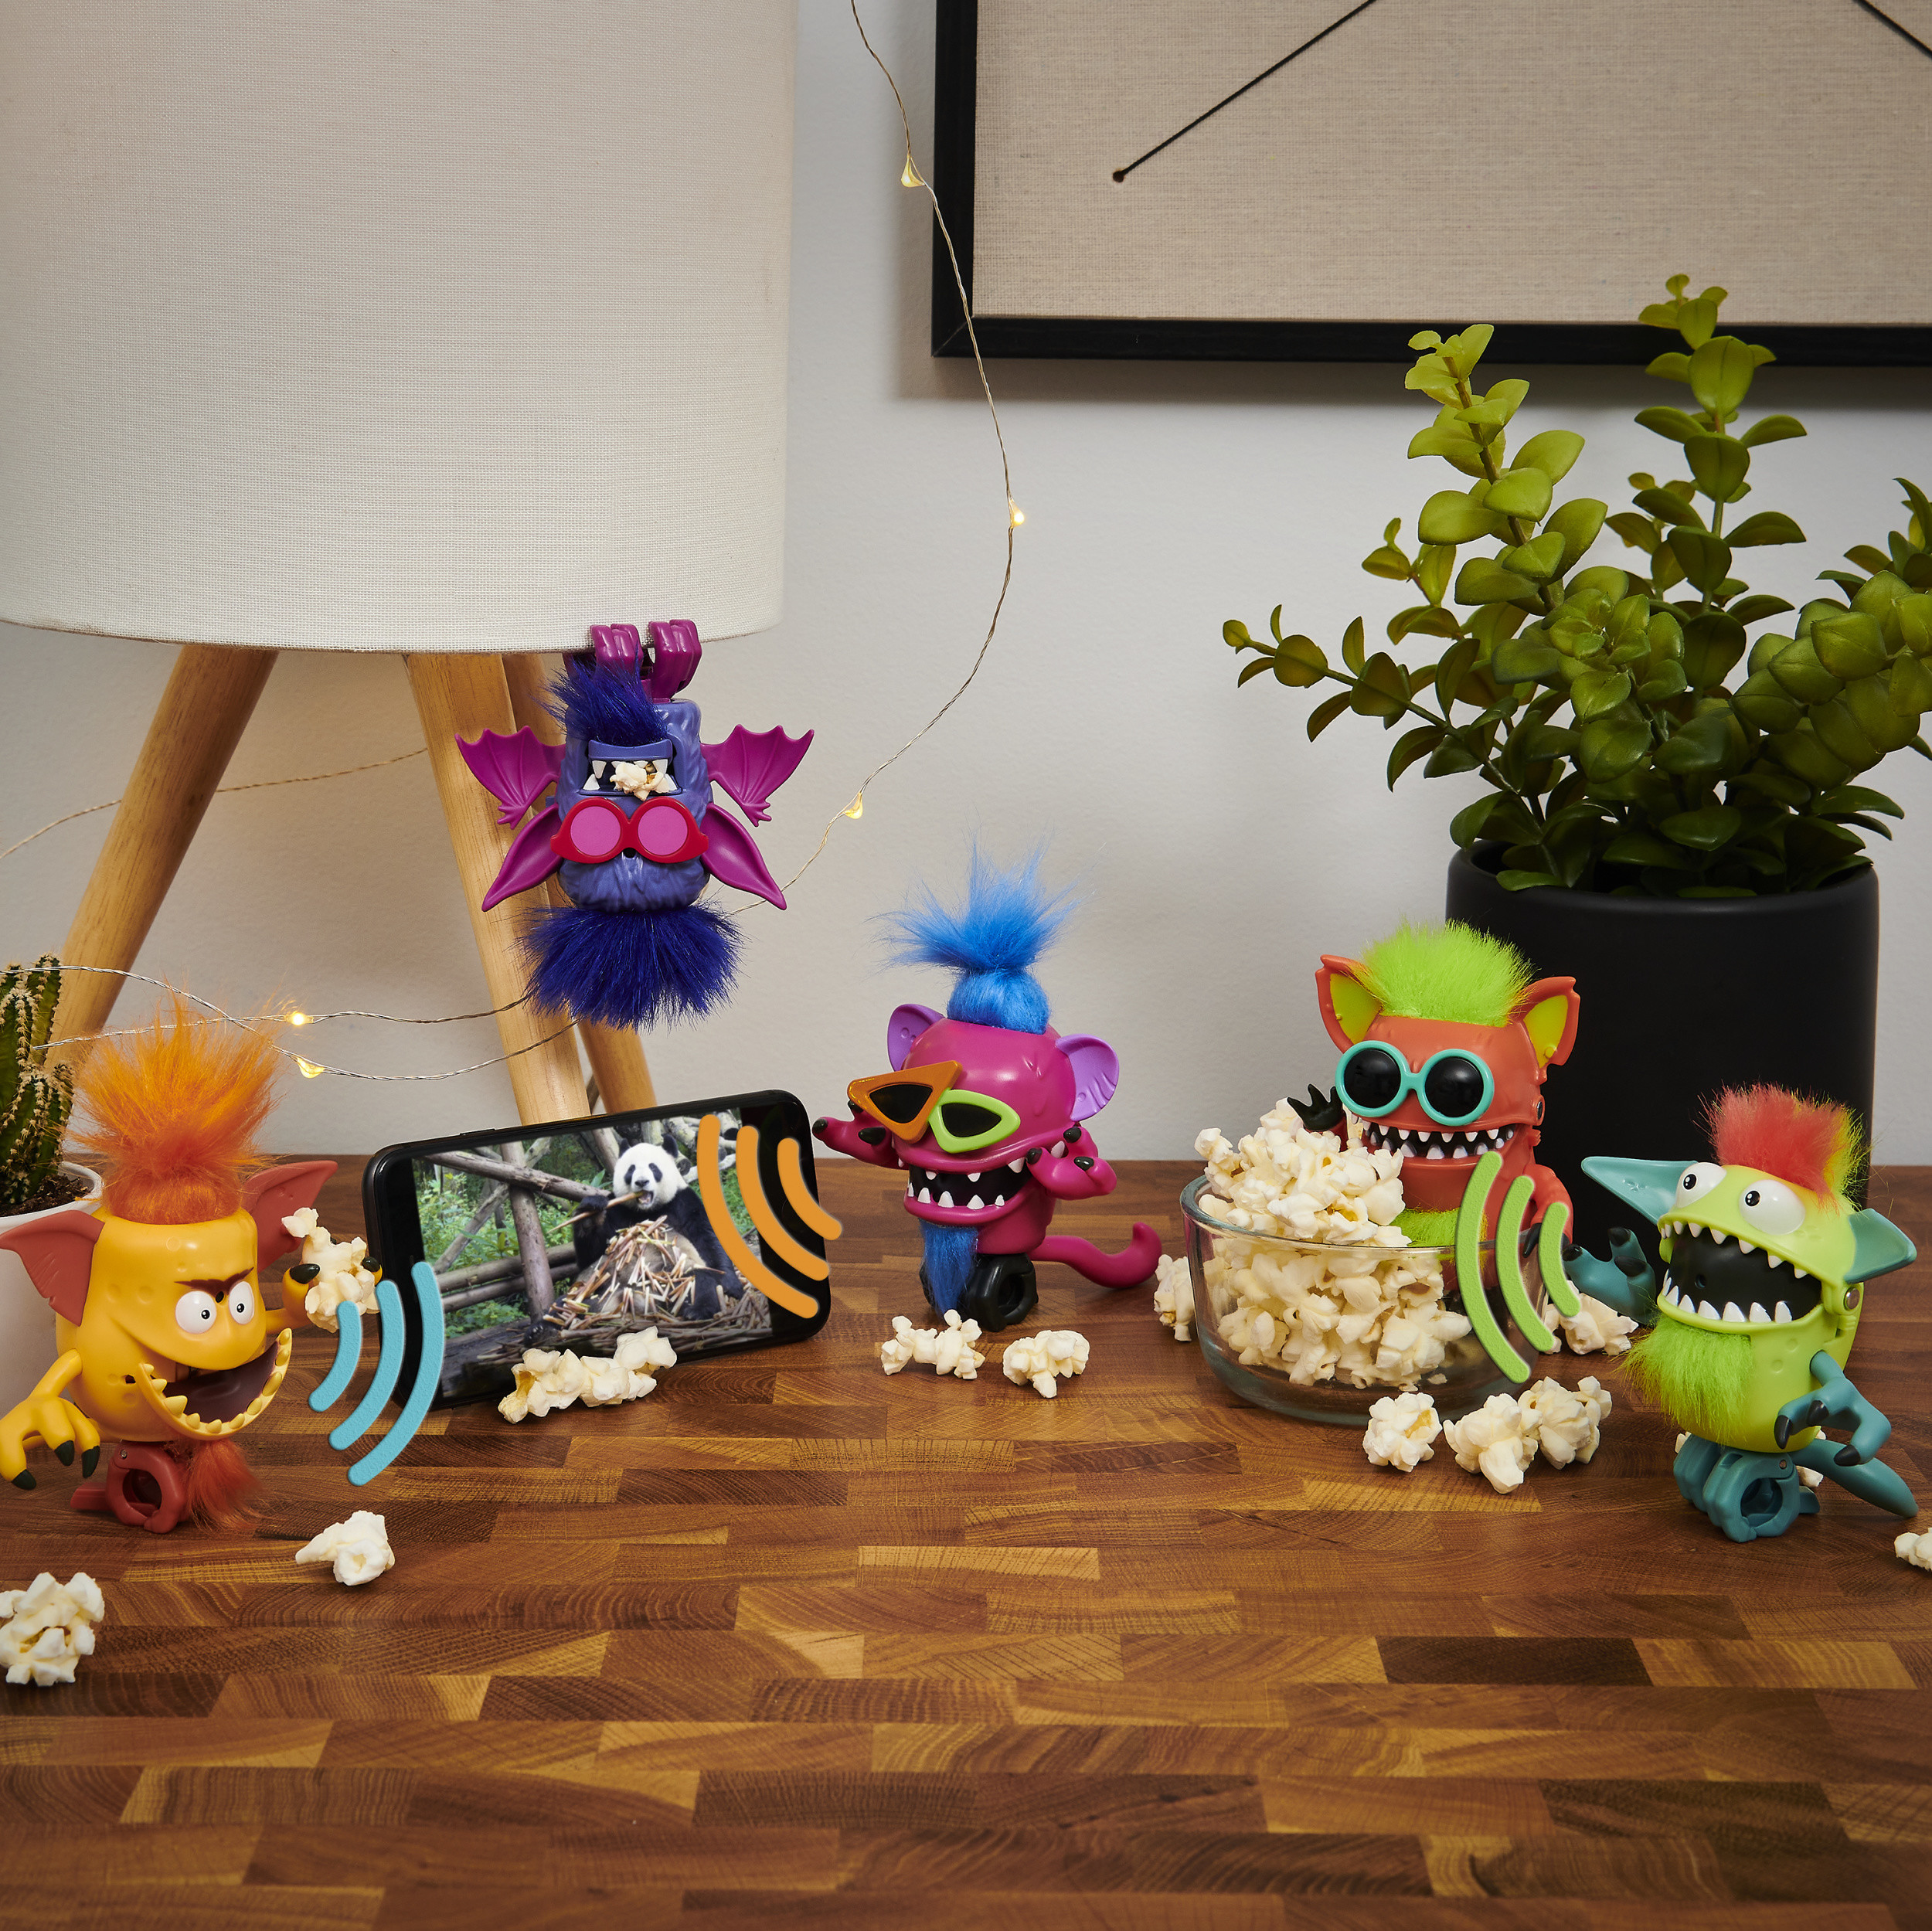 Scritterz, Bonoboz Interactive Collectible Jungle Creature Toy with Sounds and Movement, for Kids Aged 5 and up - image 6 of 8